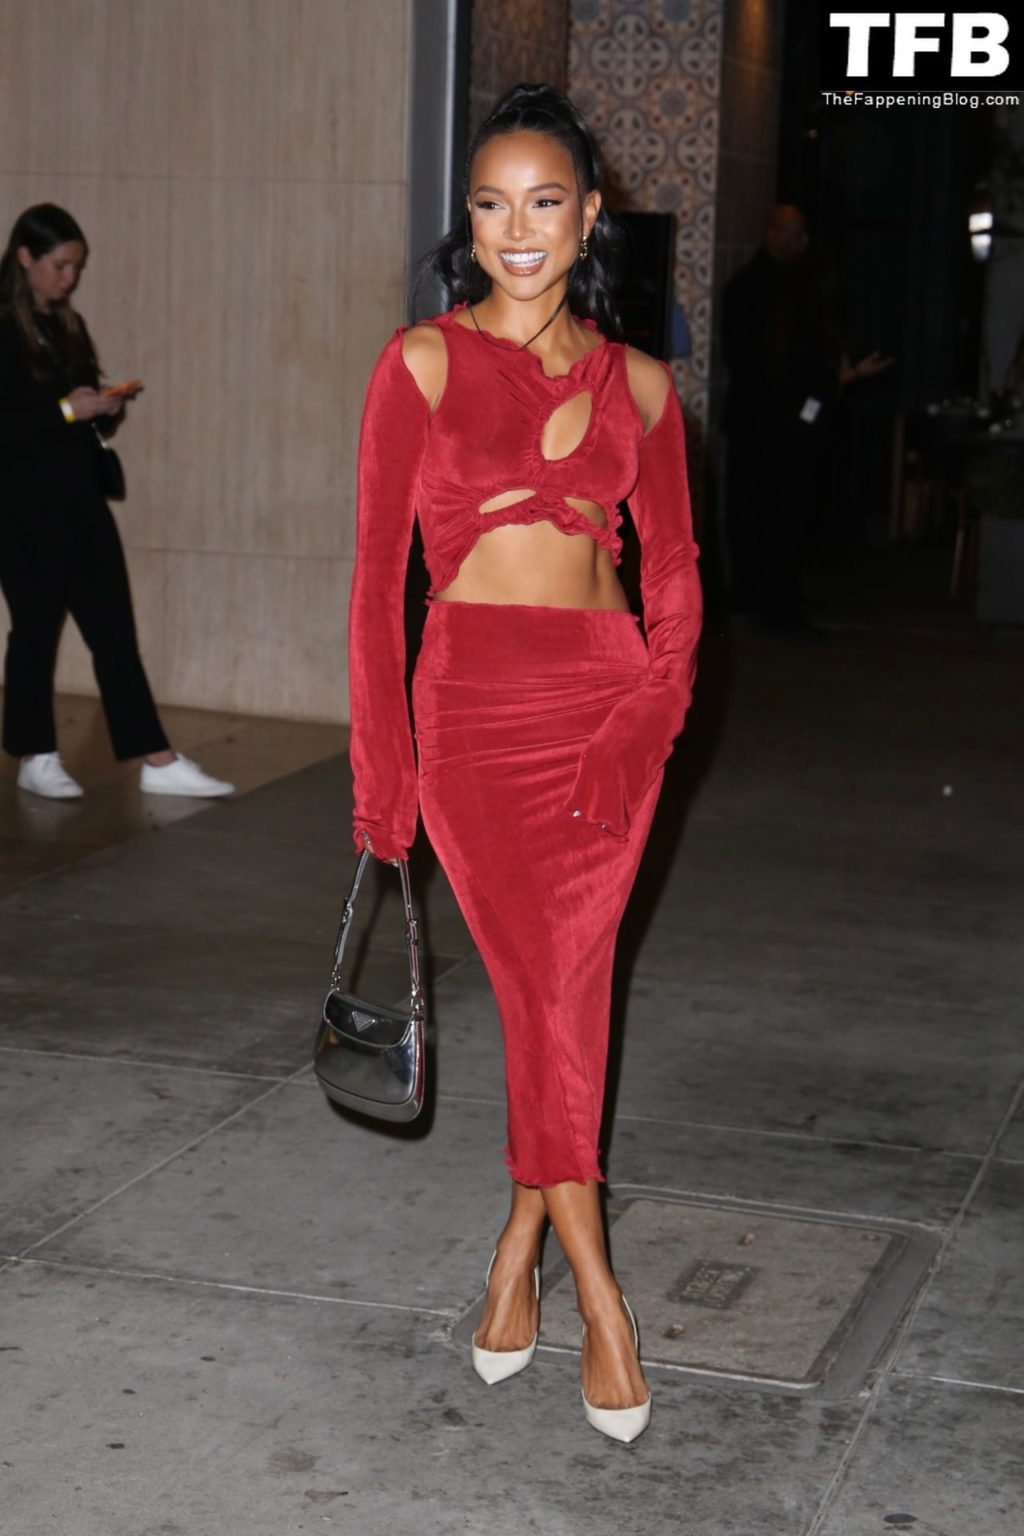 Karrueche Tran Sexy The Fappening Blog 36 1024x1536 - Karrueche Tran Shows Her Pokies in a Red Dress at The Hollywood Reporter’s Oscar Nominees Night (68 Photos)